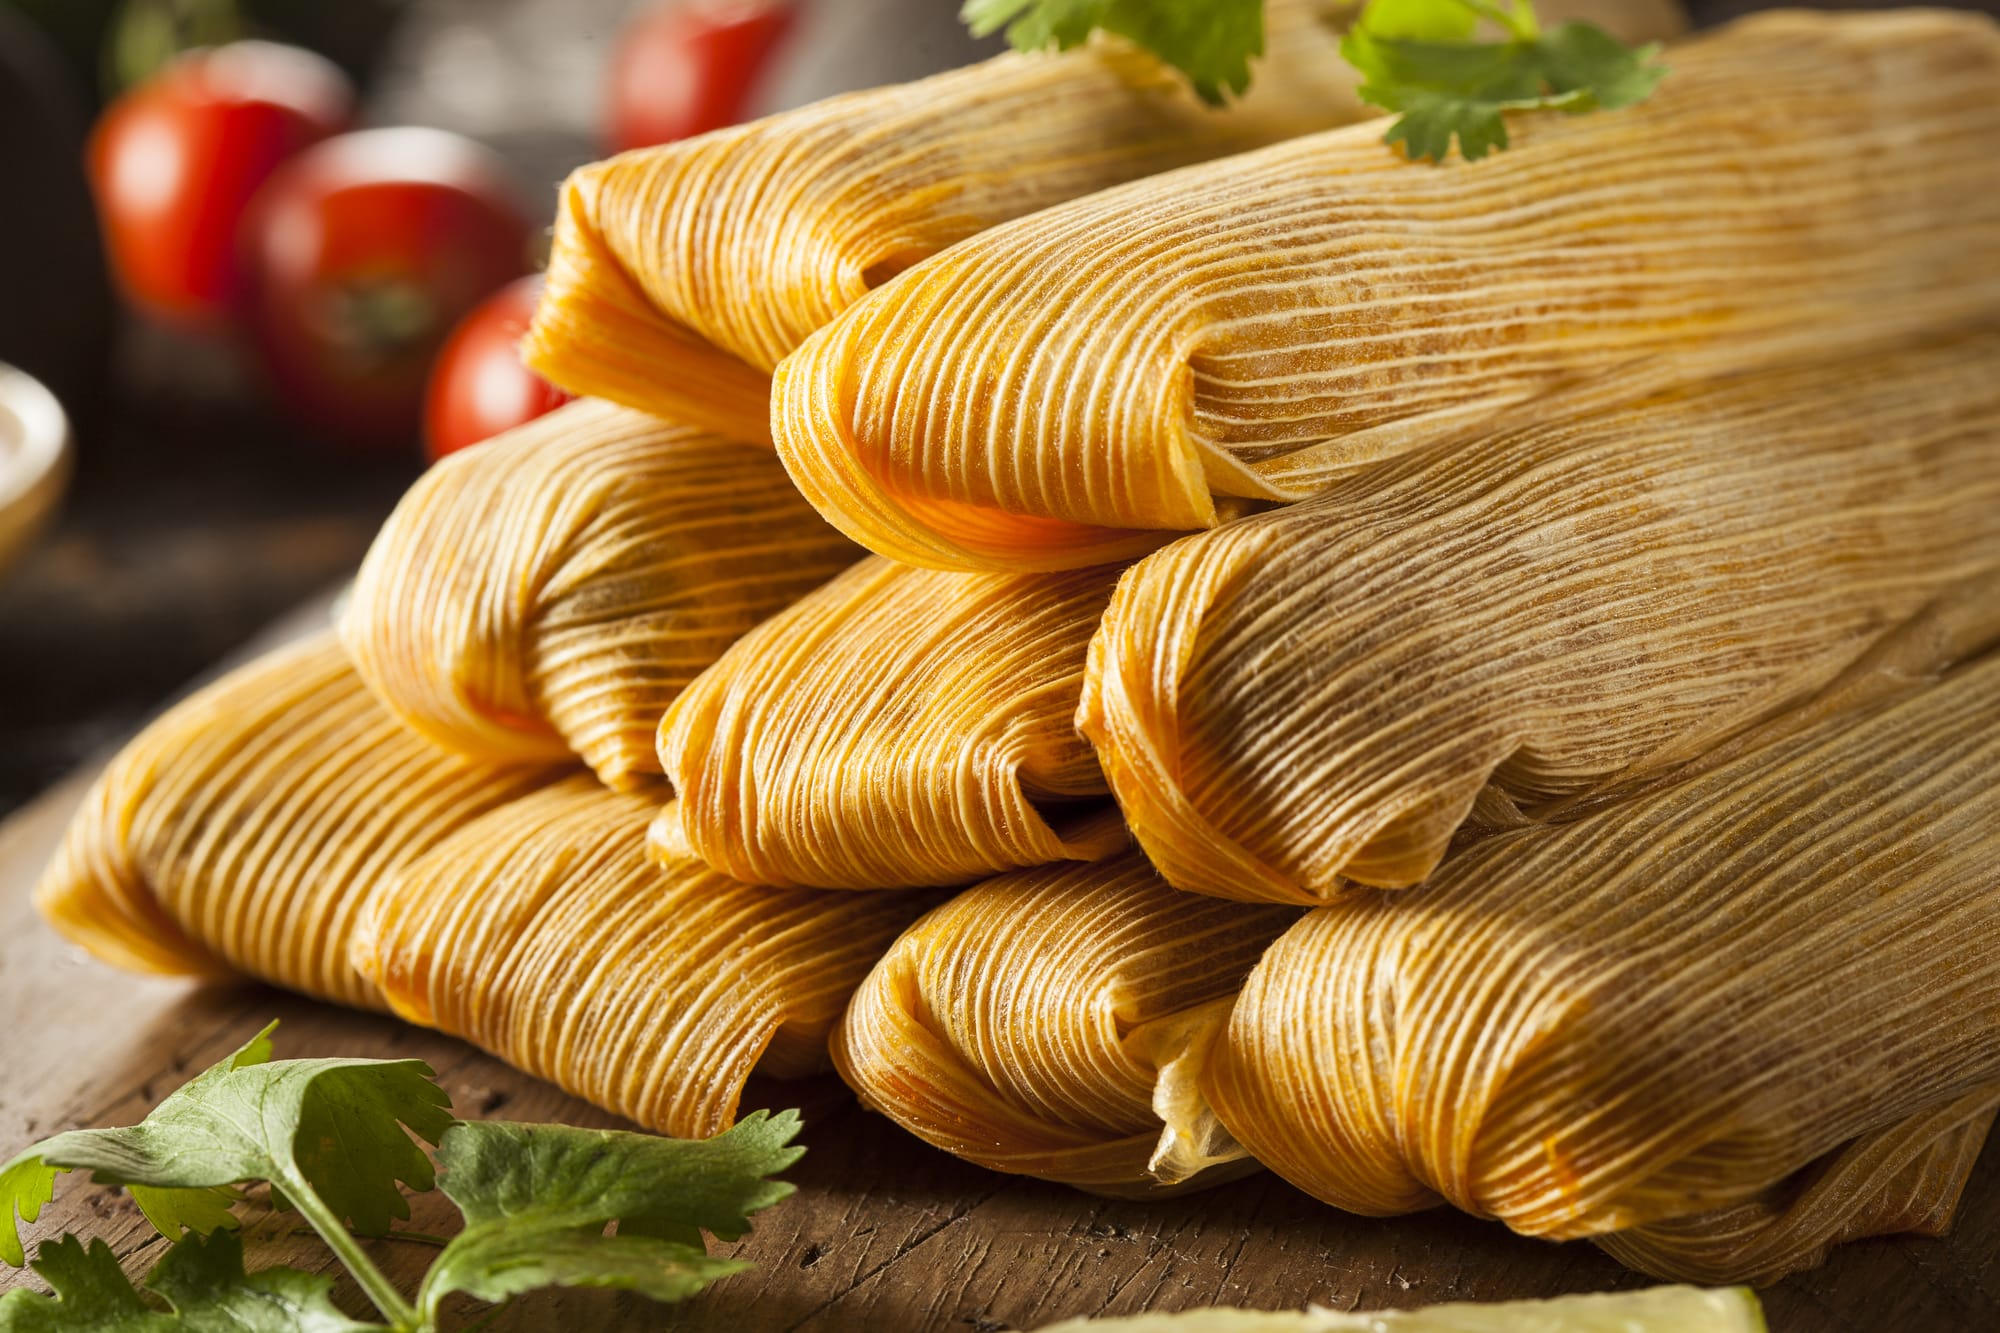 Is it okay to reuse the corn husks that were wrapped around tamales you've  eaten? What steps should you take if it is okay to do so? - Quora